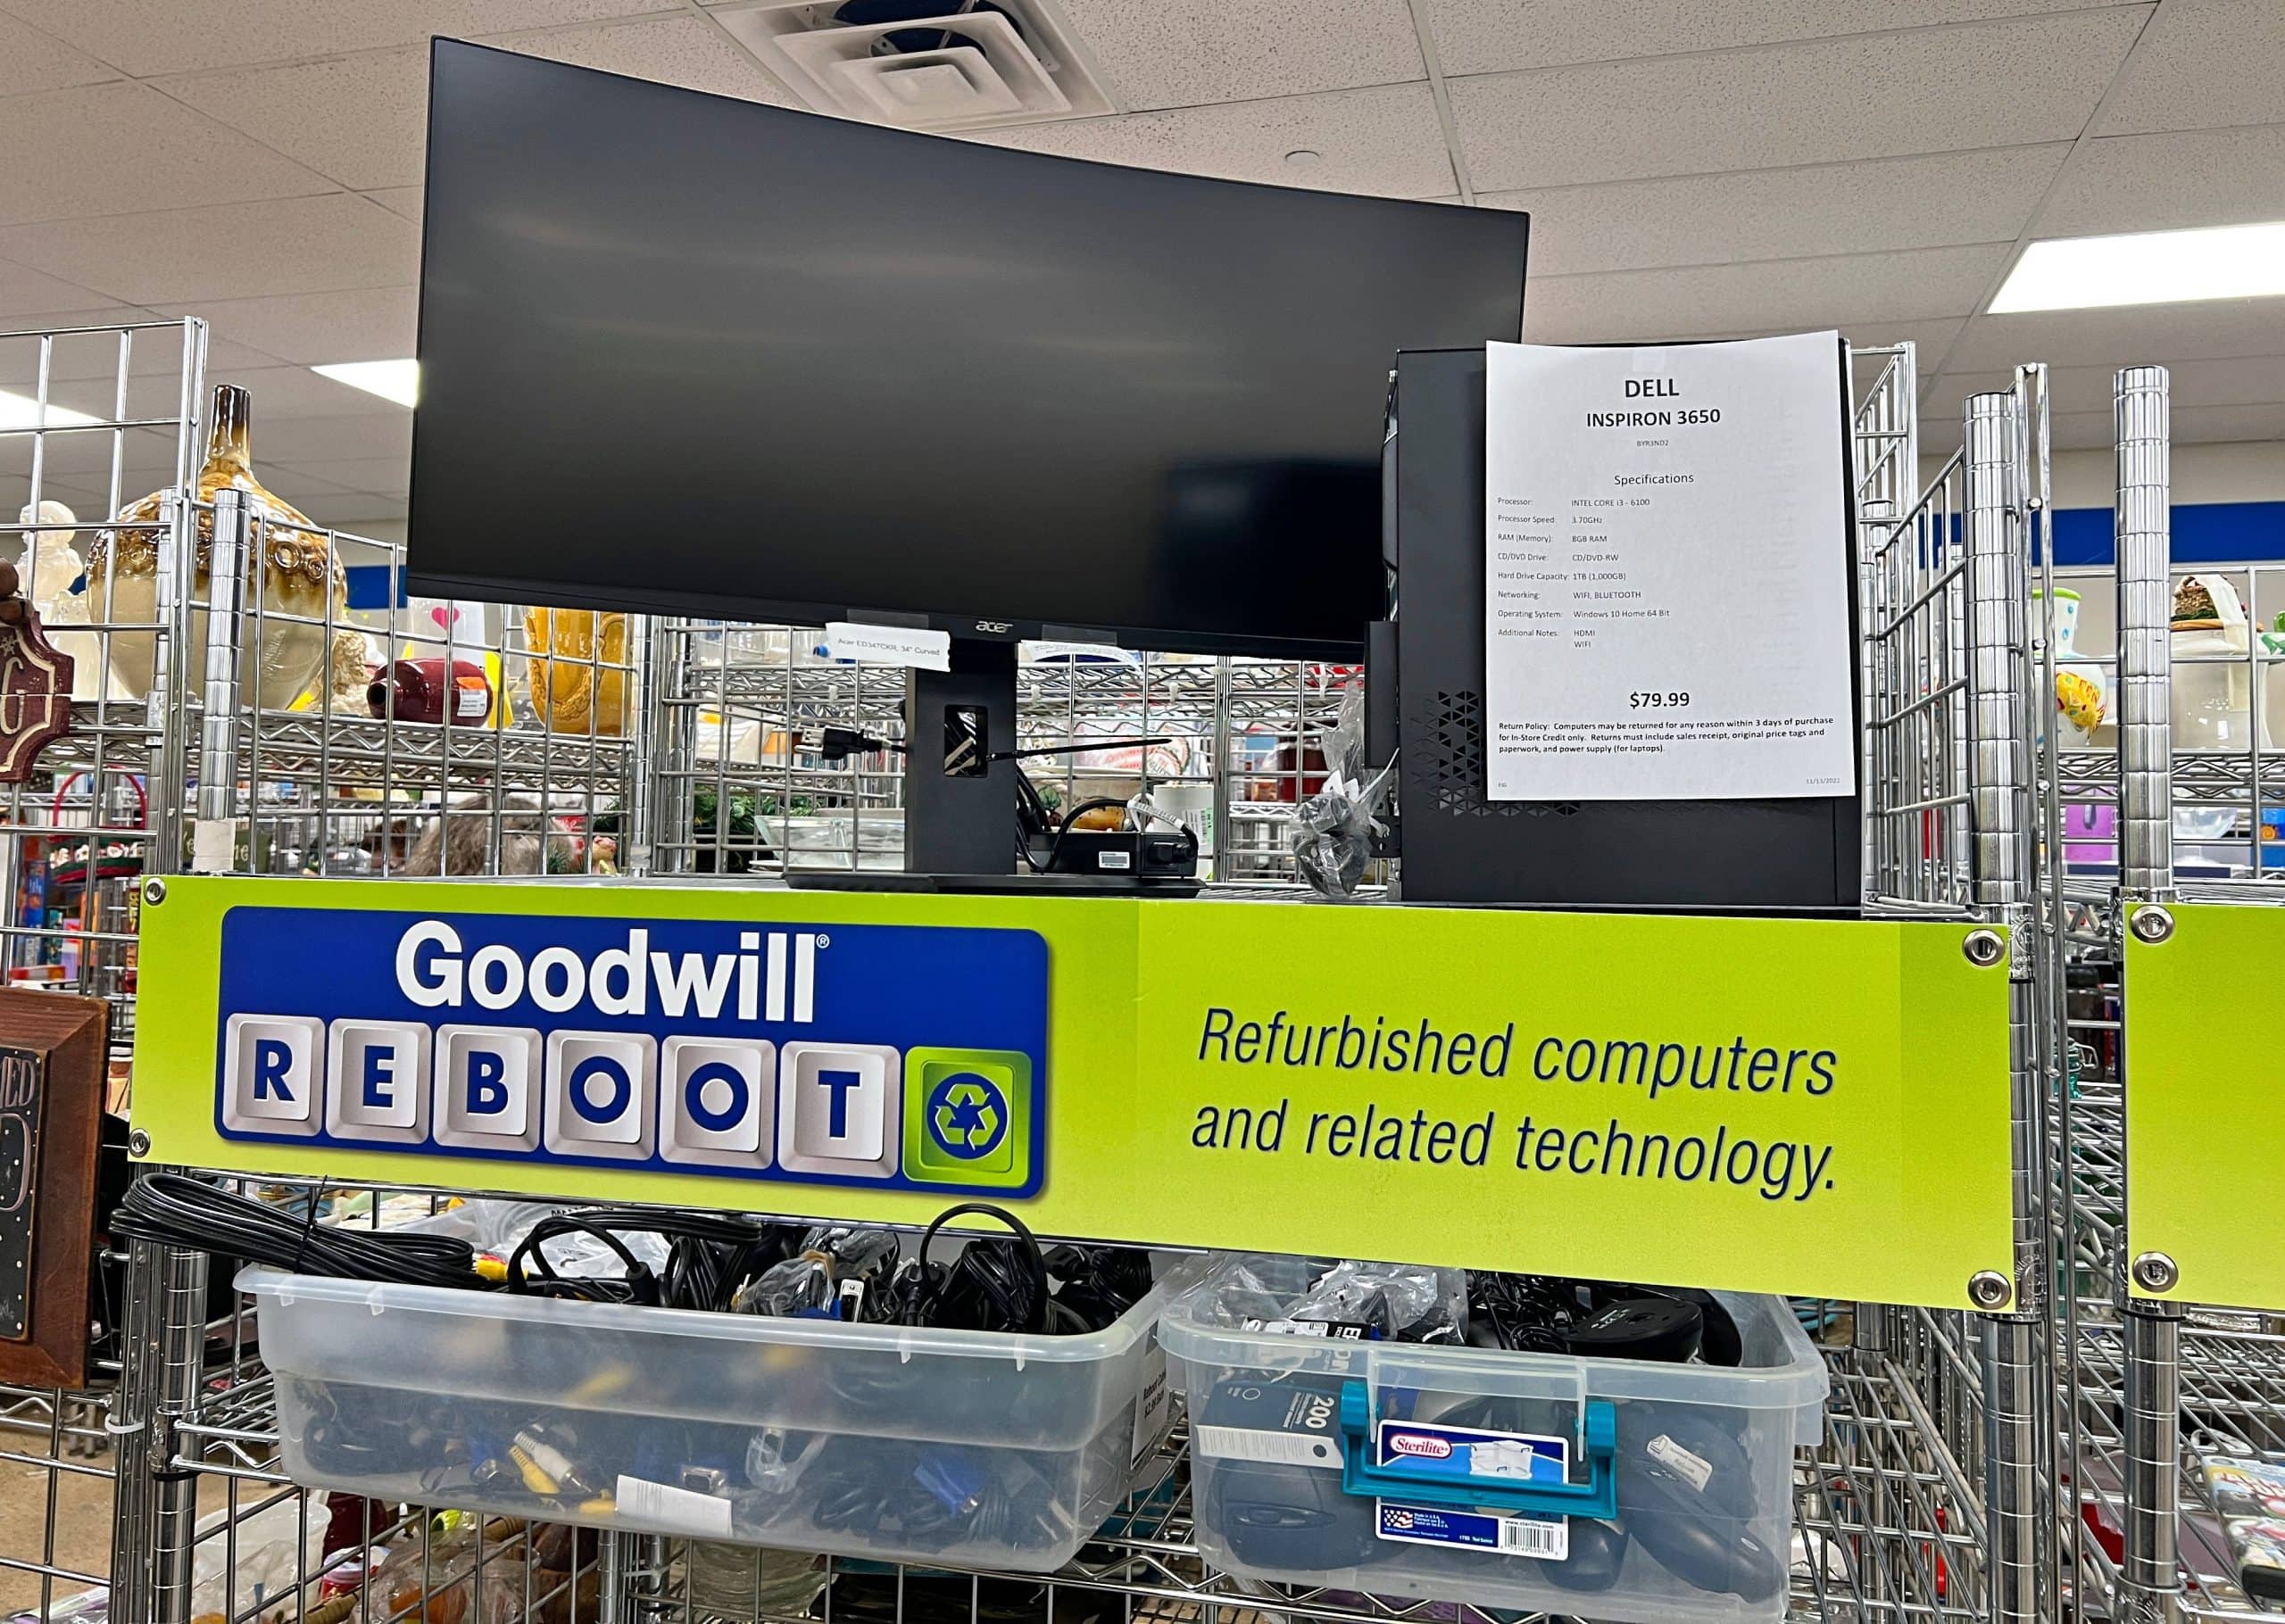 National partnerships like Goodwill Reboot provide added sustainability to what we do as well as needed and affordable community recycling services.